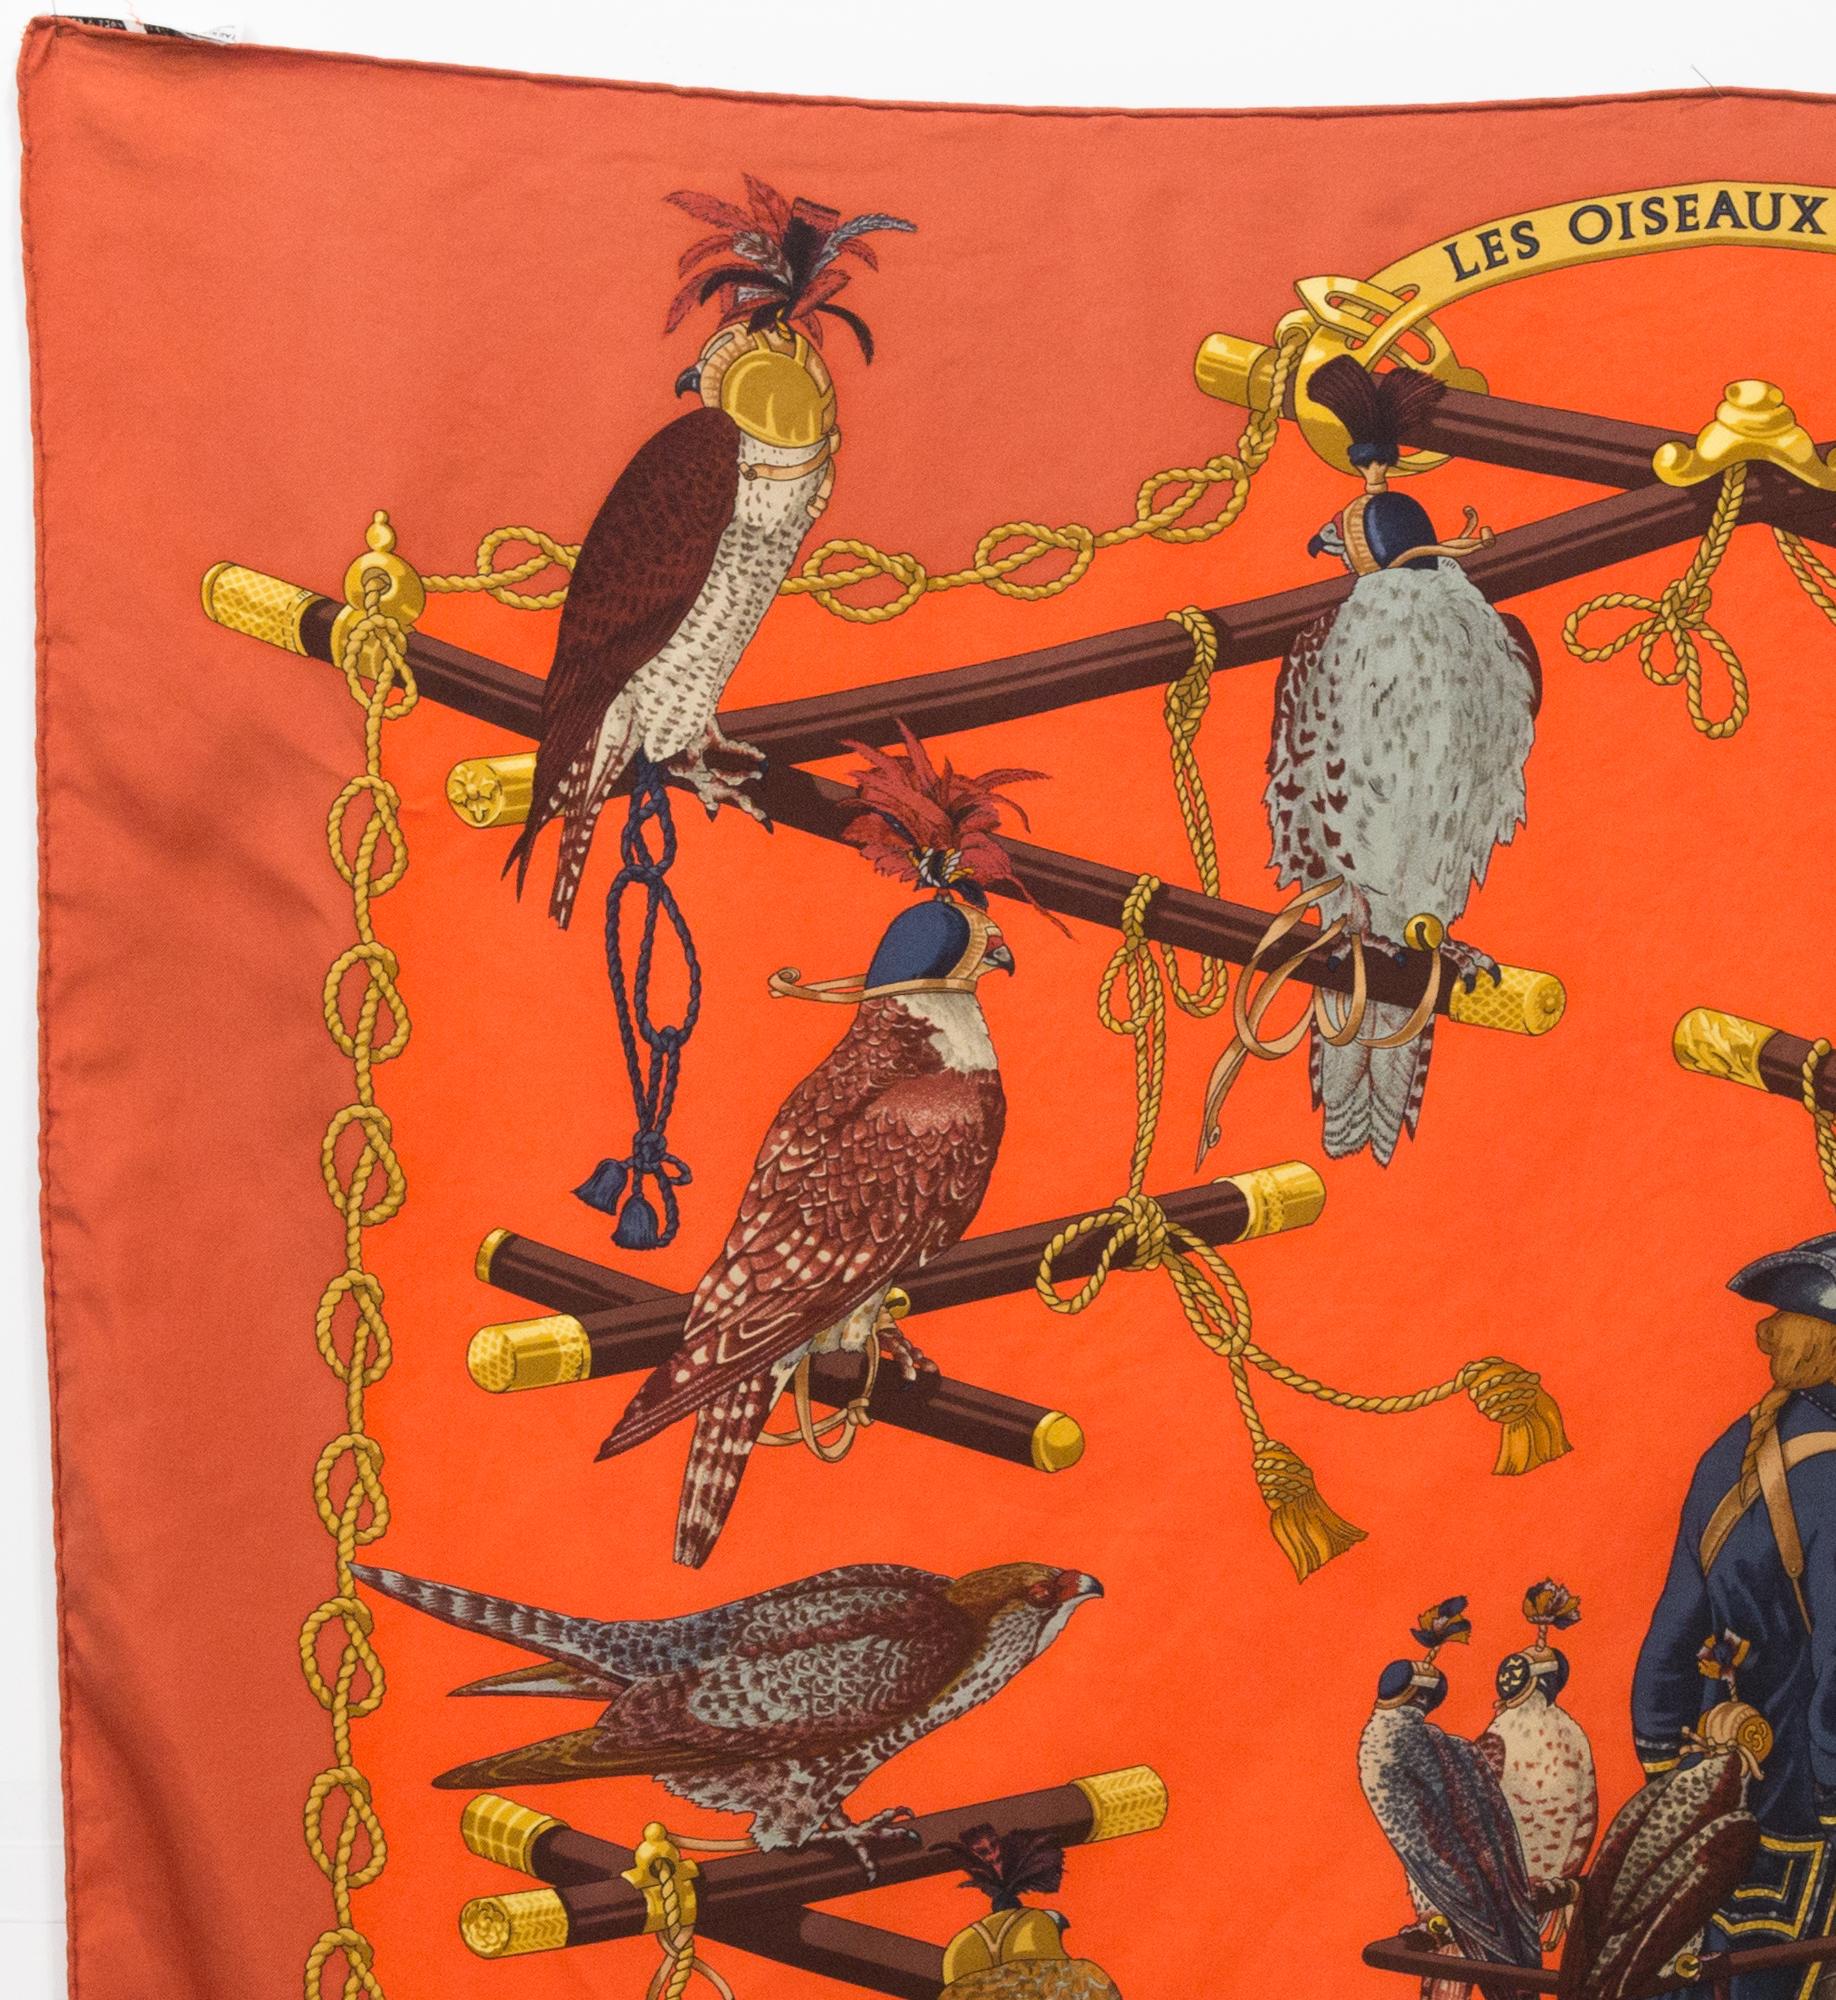 Hermès  « Les Oiseaux du Roy » by Cathy Latham silk scarf featuring an orange border, a Hermès signature. 
Circa 1994
In good vintage condition. Made in France.
35,4in. (90cm)  X 35,4in. (90cm)
We guarantee you will receive this  iconic item as